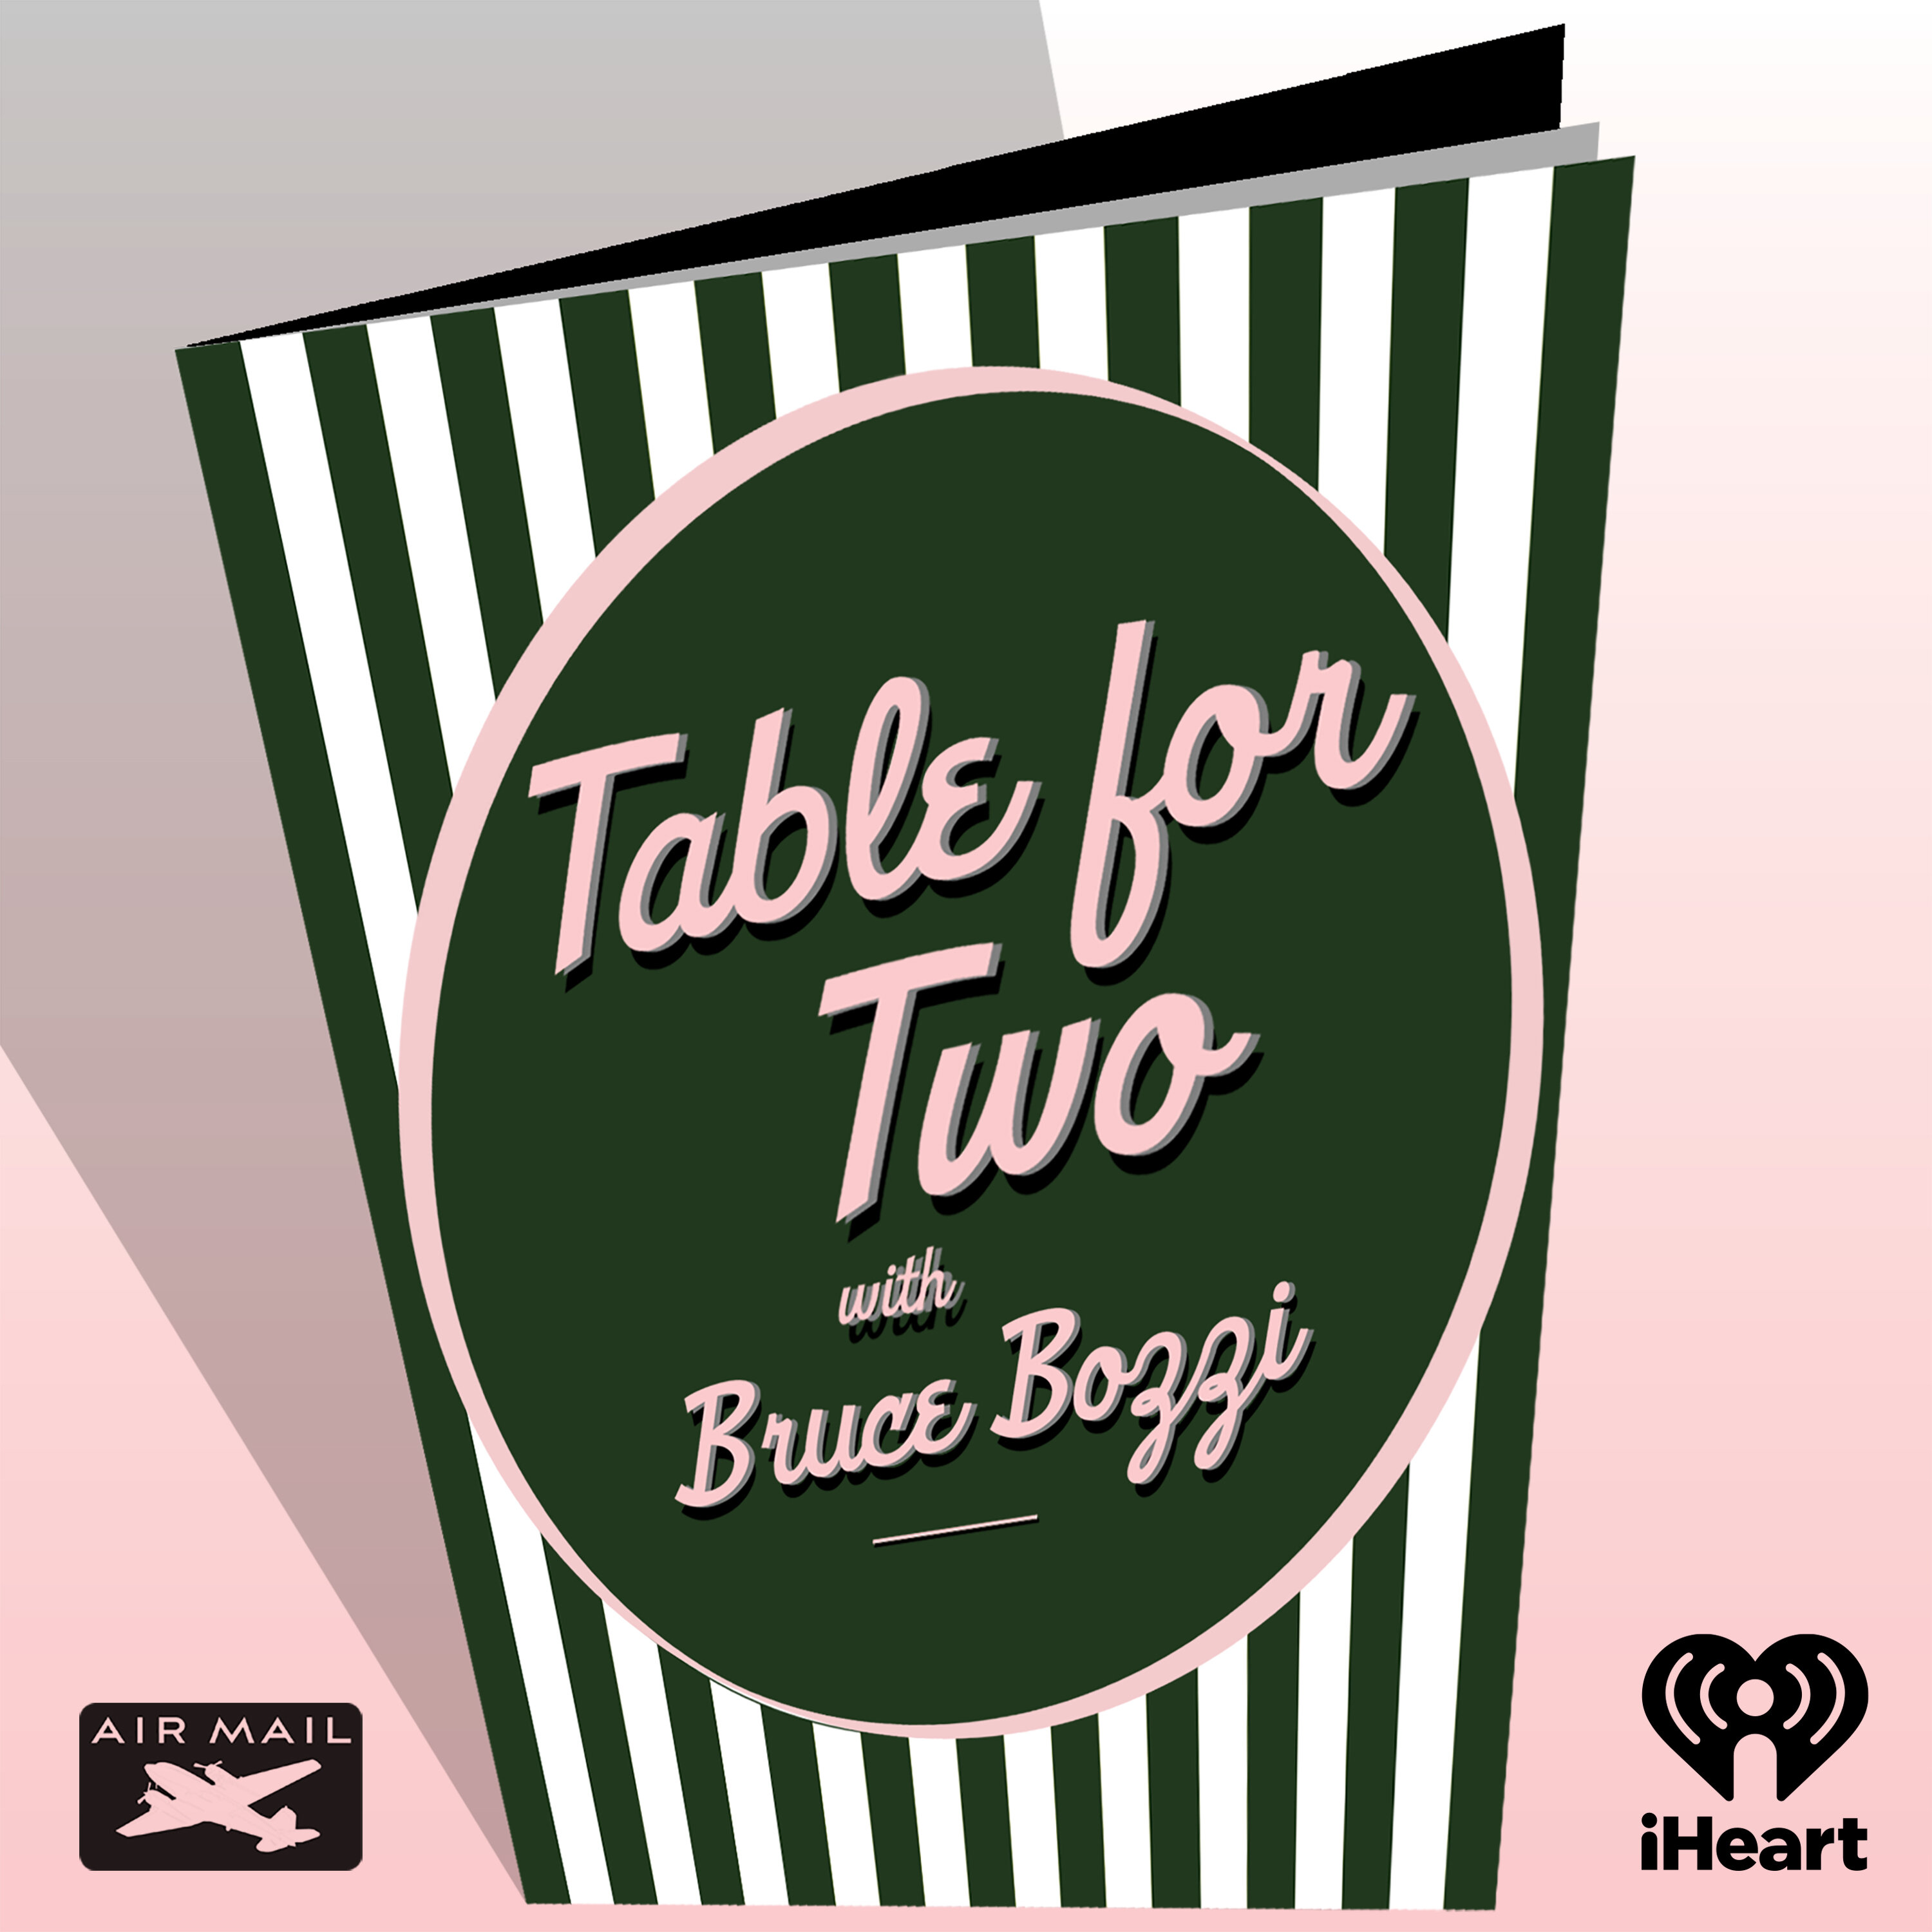 Table for Two podcast show image